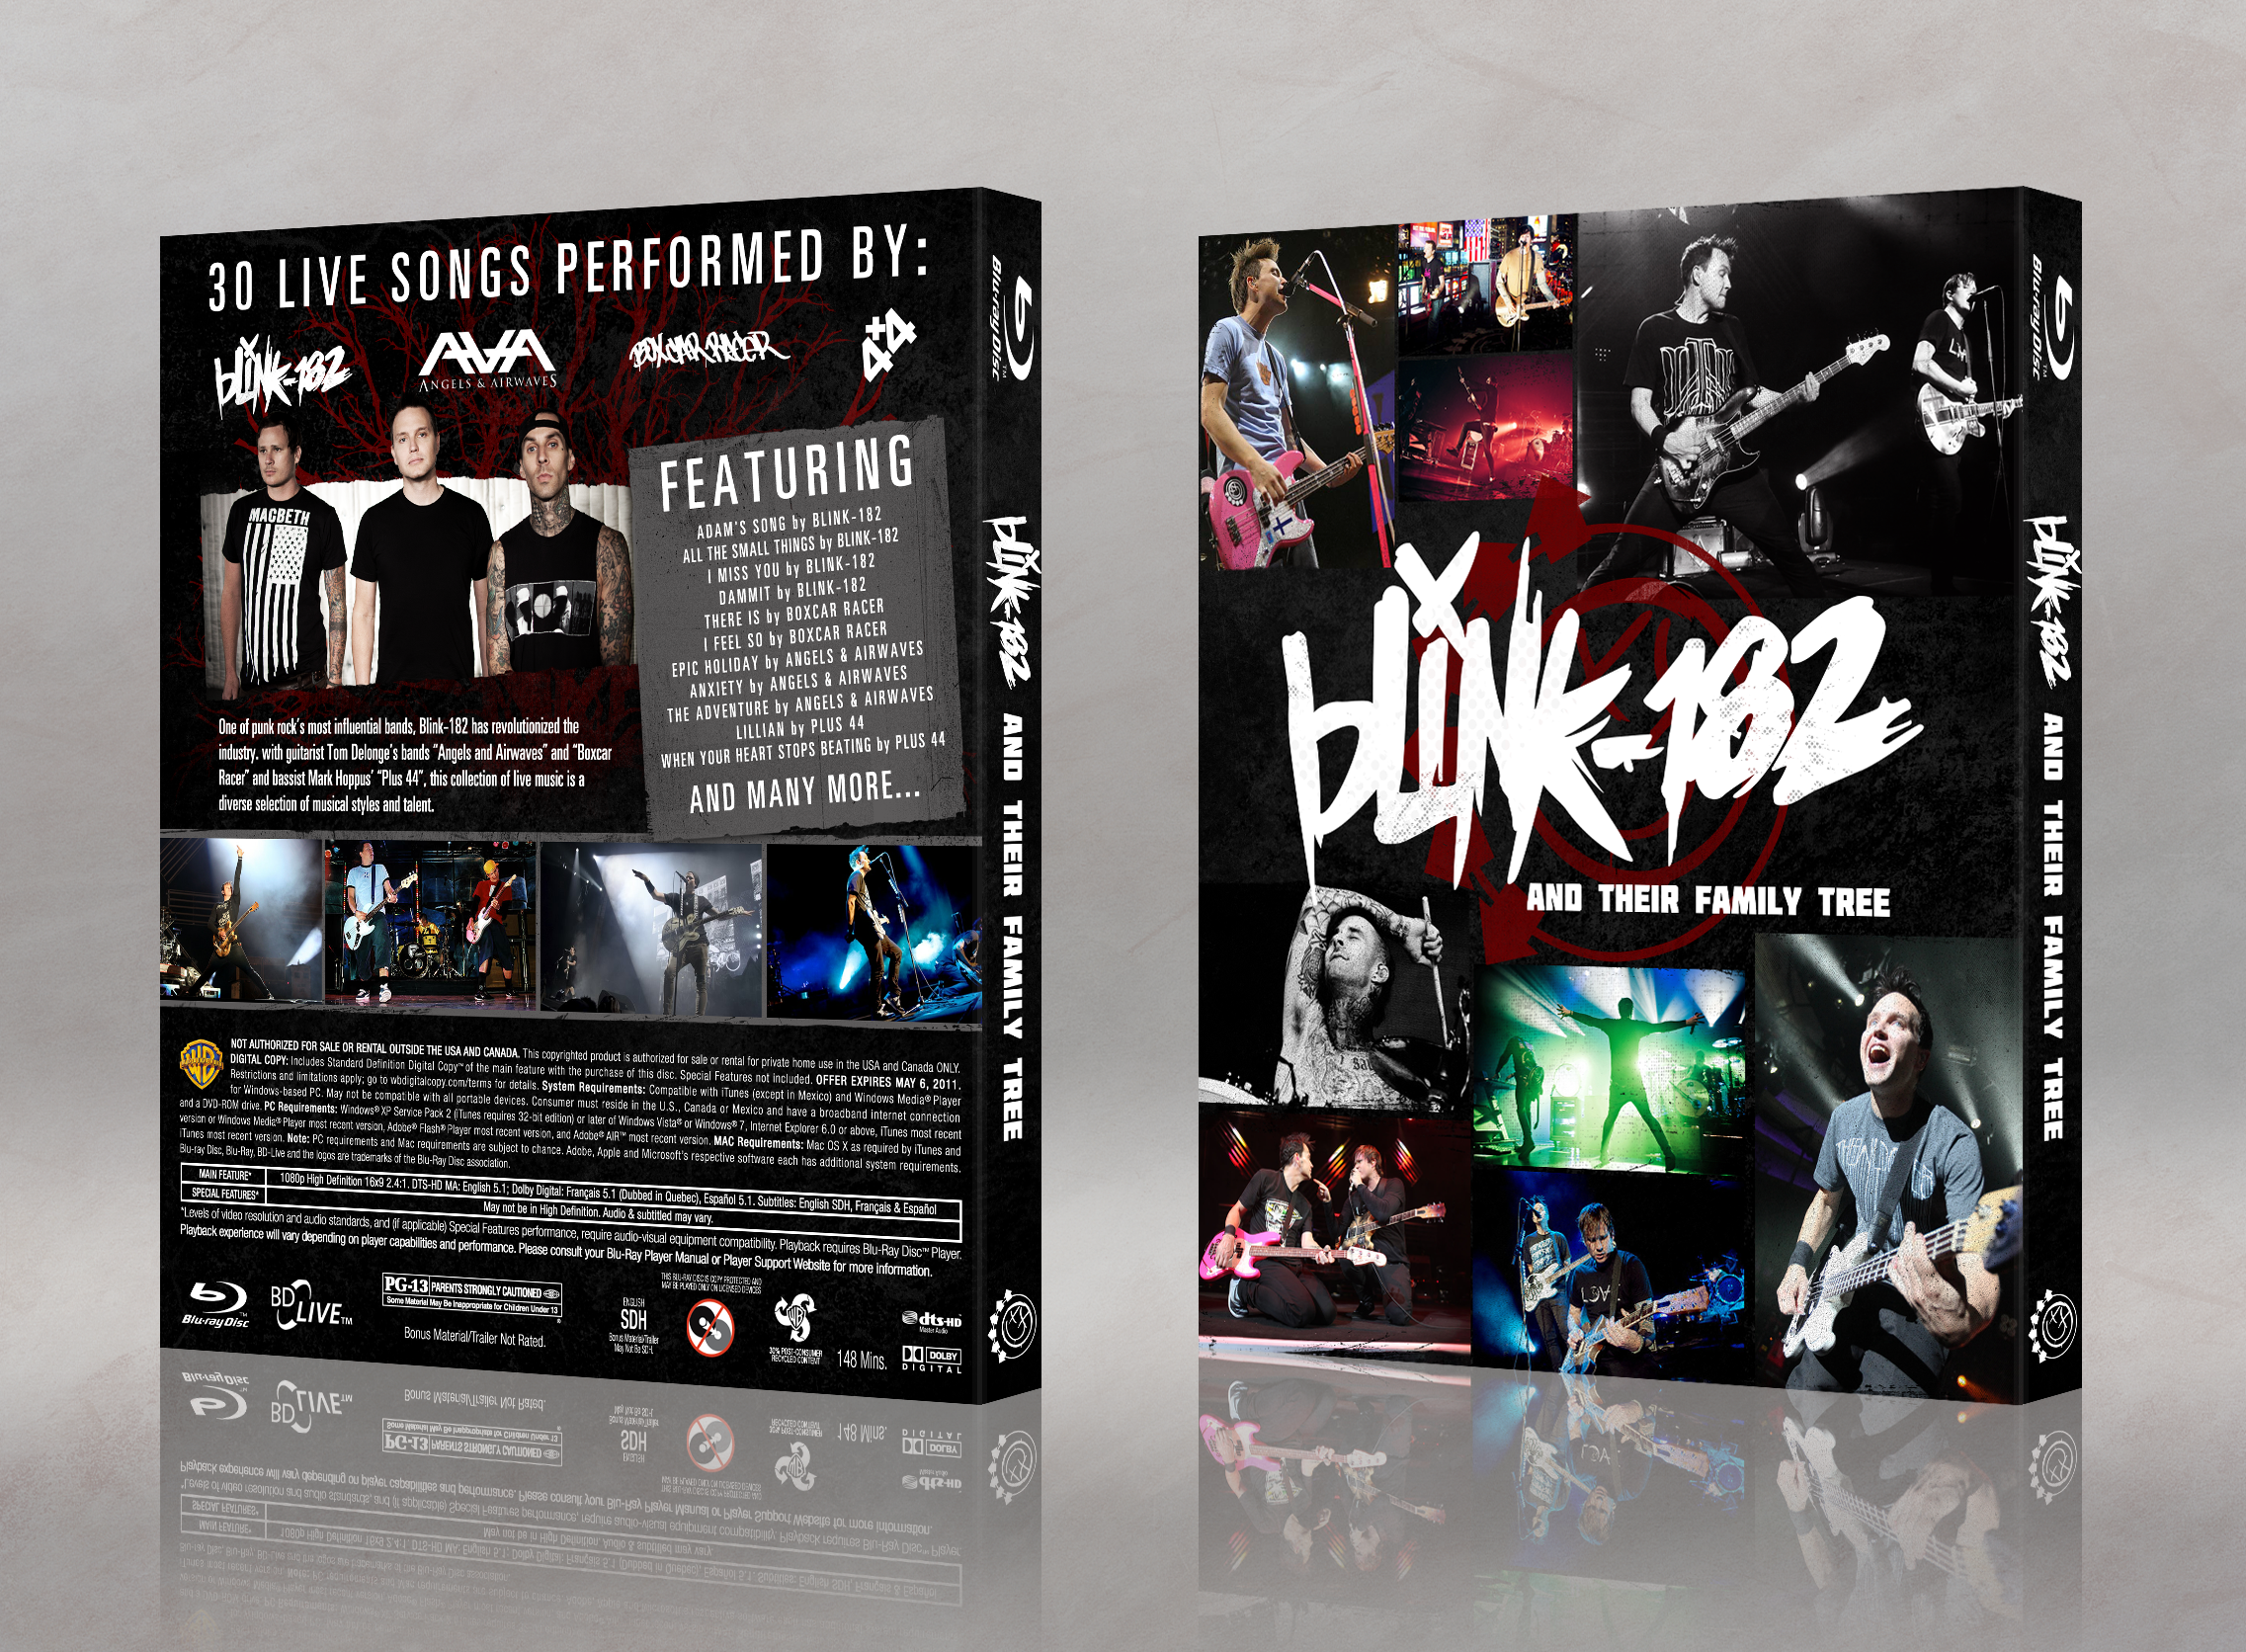 Blink-182 and Their Family Tree box cover